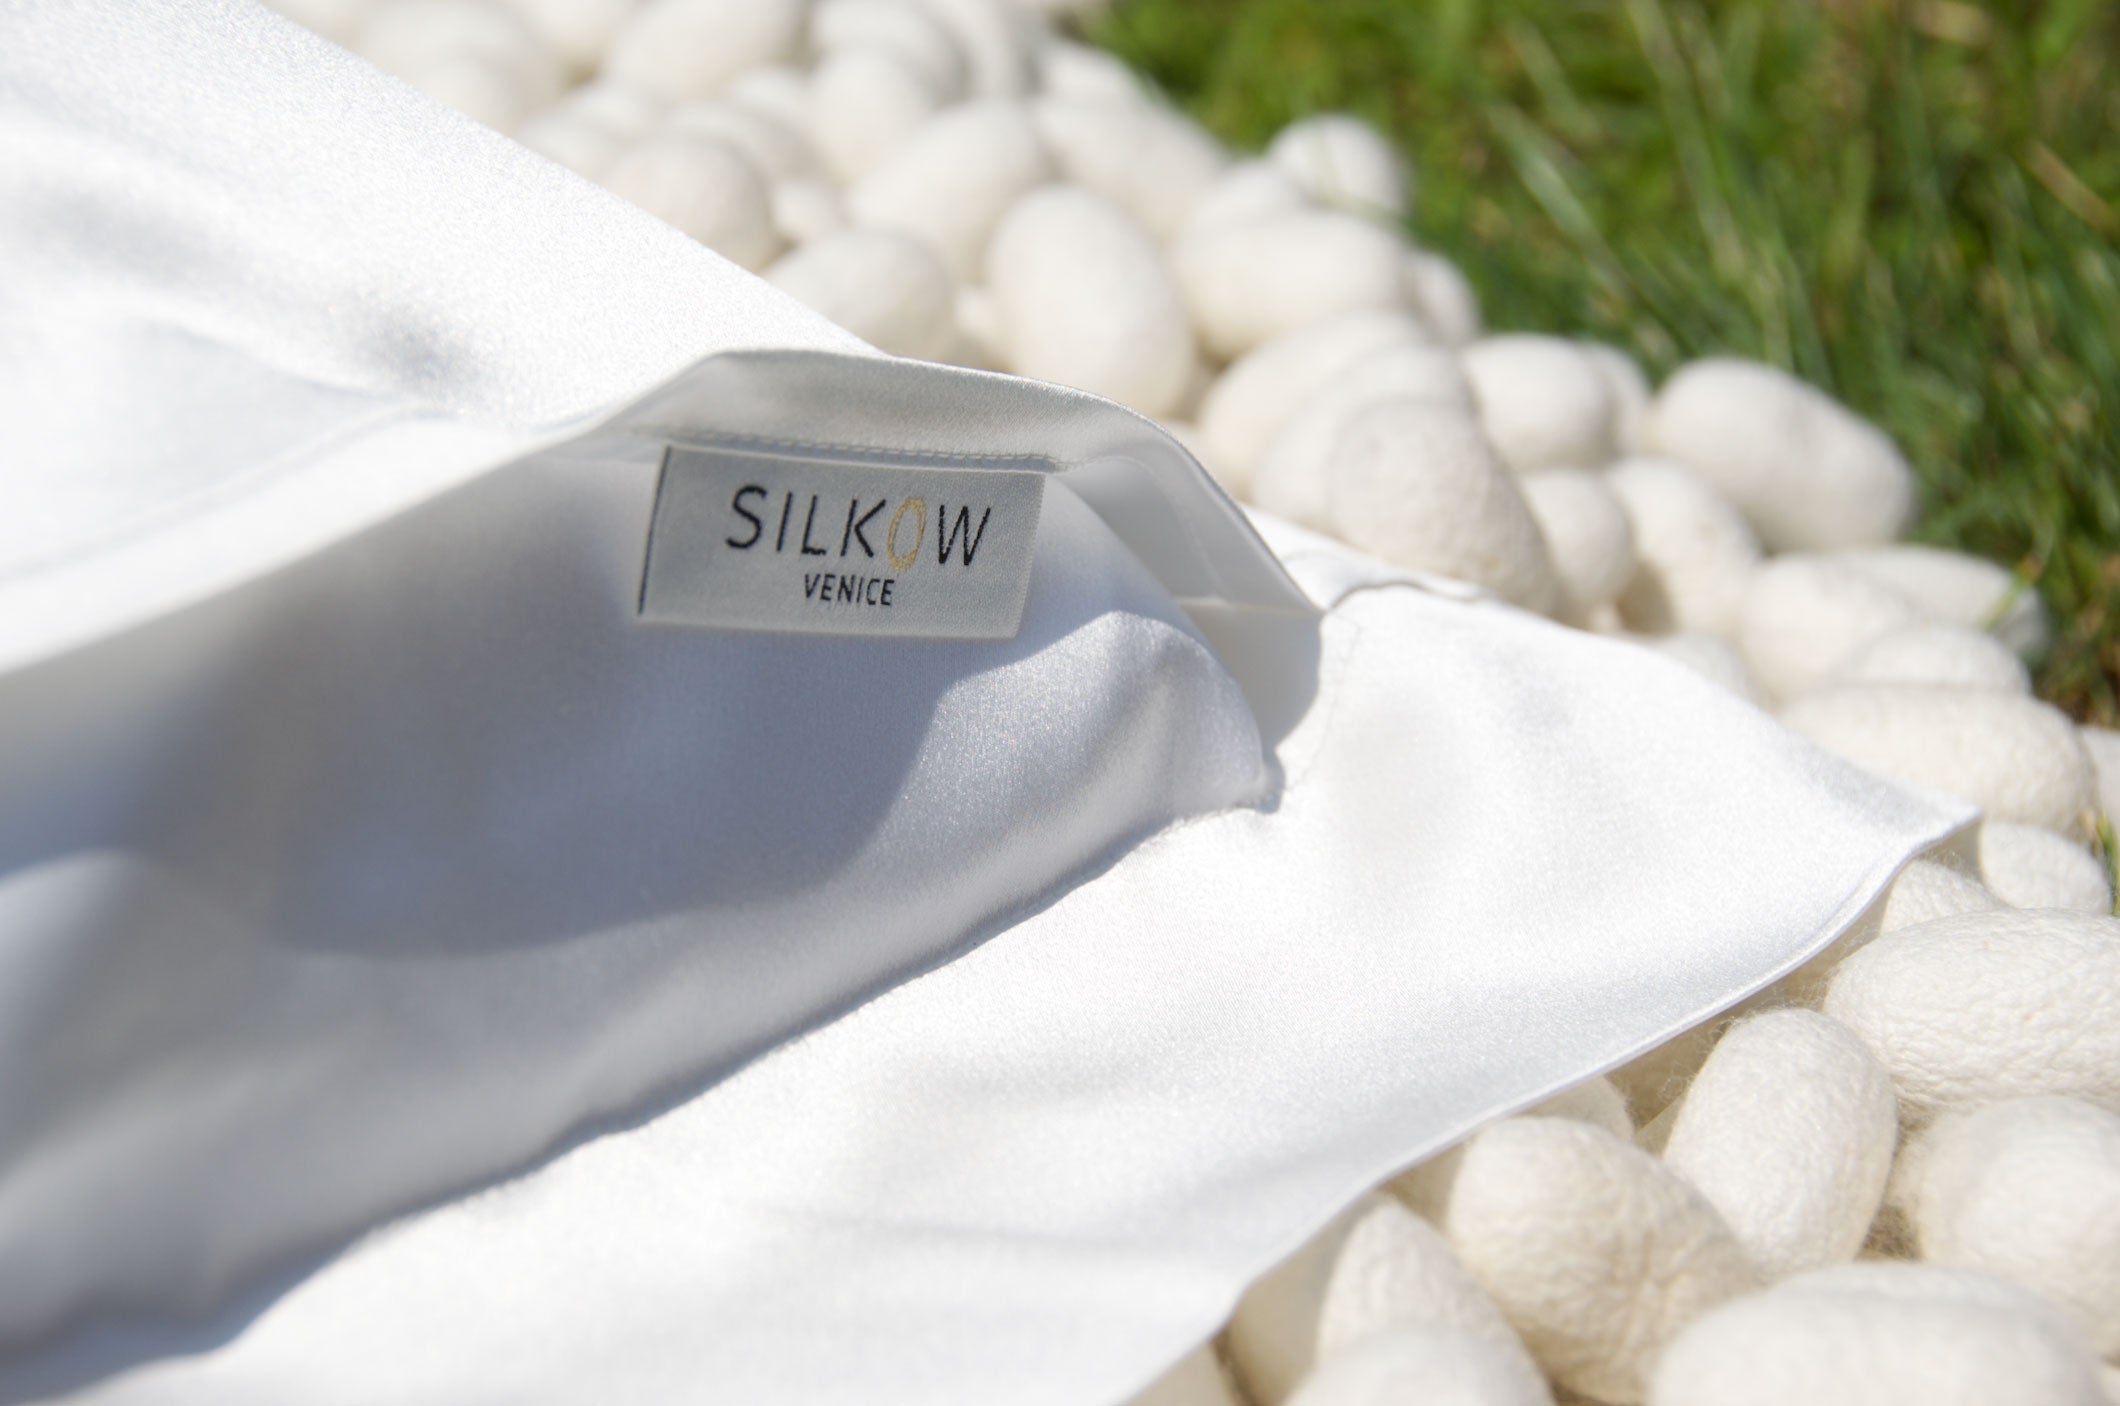 Set of 2 L22 pillowcases - Silk satin with wide edges.